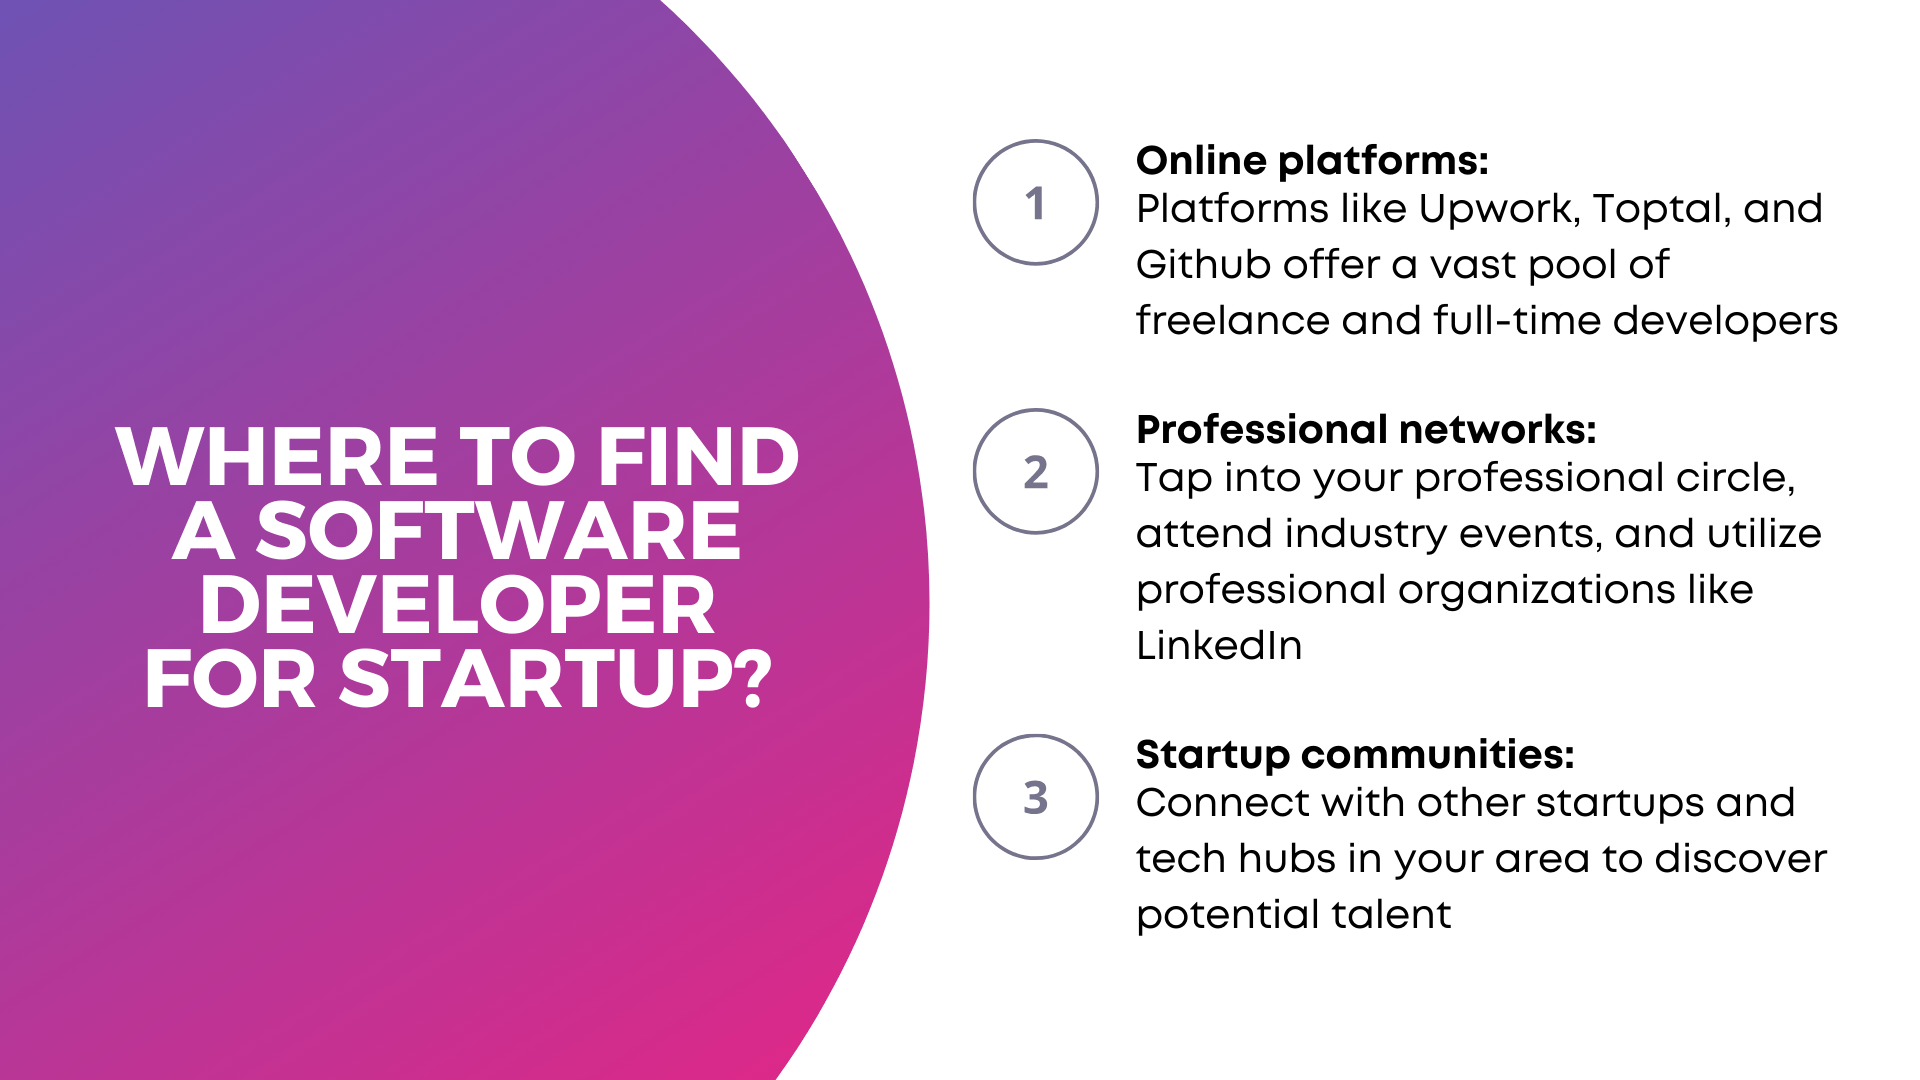 Where to Find a Software Developer for Startup?